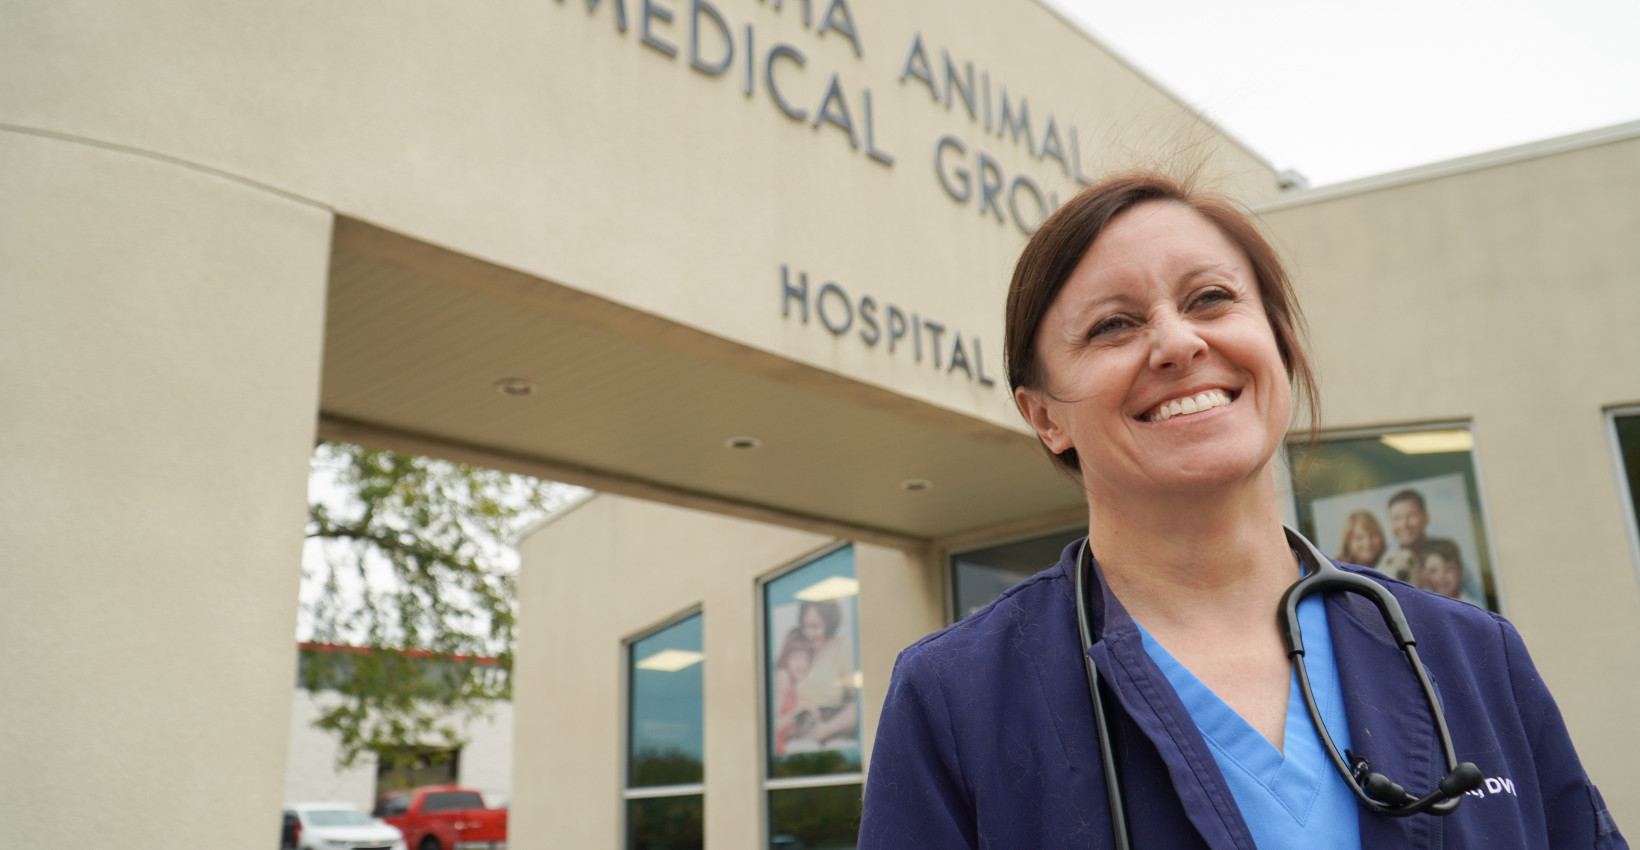 Dr Courtney Knott stands in front of omaha animal medical group building